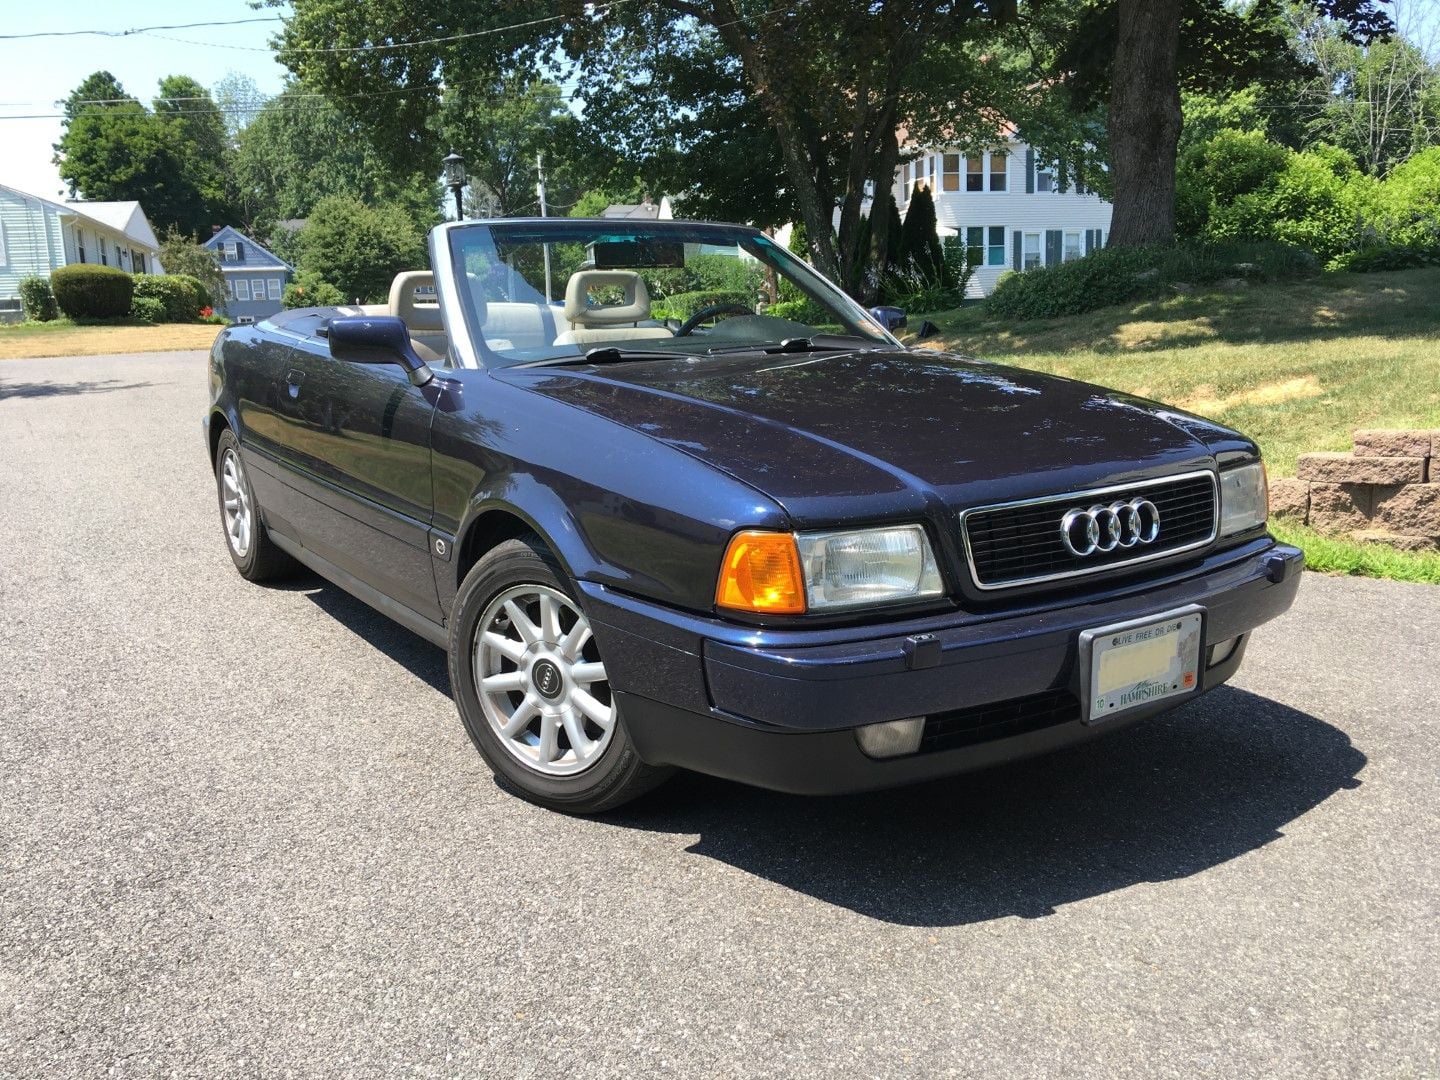 1996 Audi Cabriolet - FS: 1996 Audi 90 Cabriolet - Used - VIN WAUAA88G2TA004466 - 6 cyl - 2WD - Automatic - Convertible - Blue - Salem, NH 03079, United States